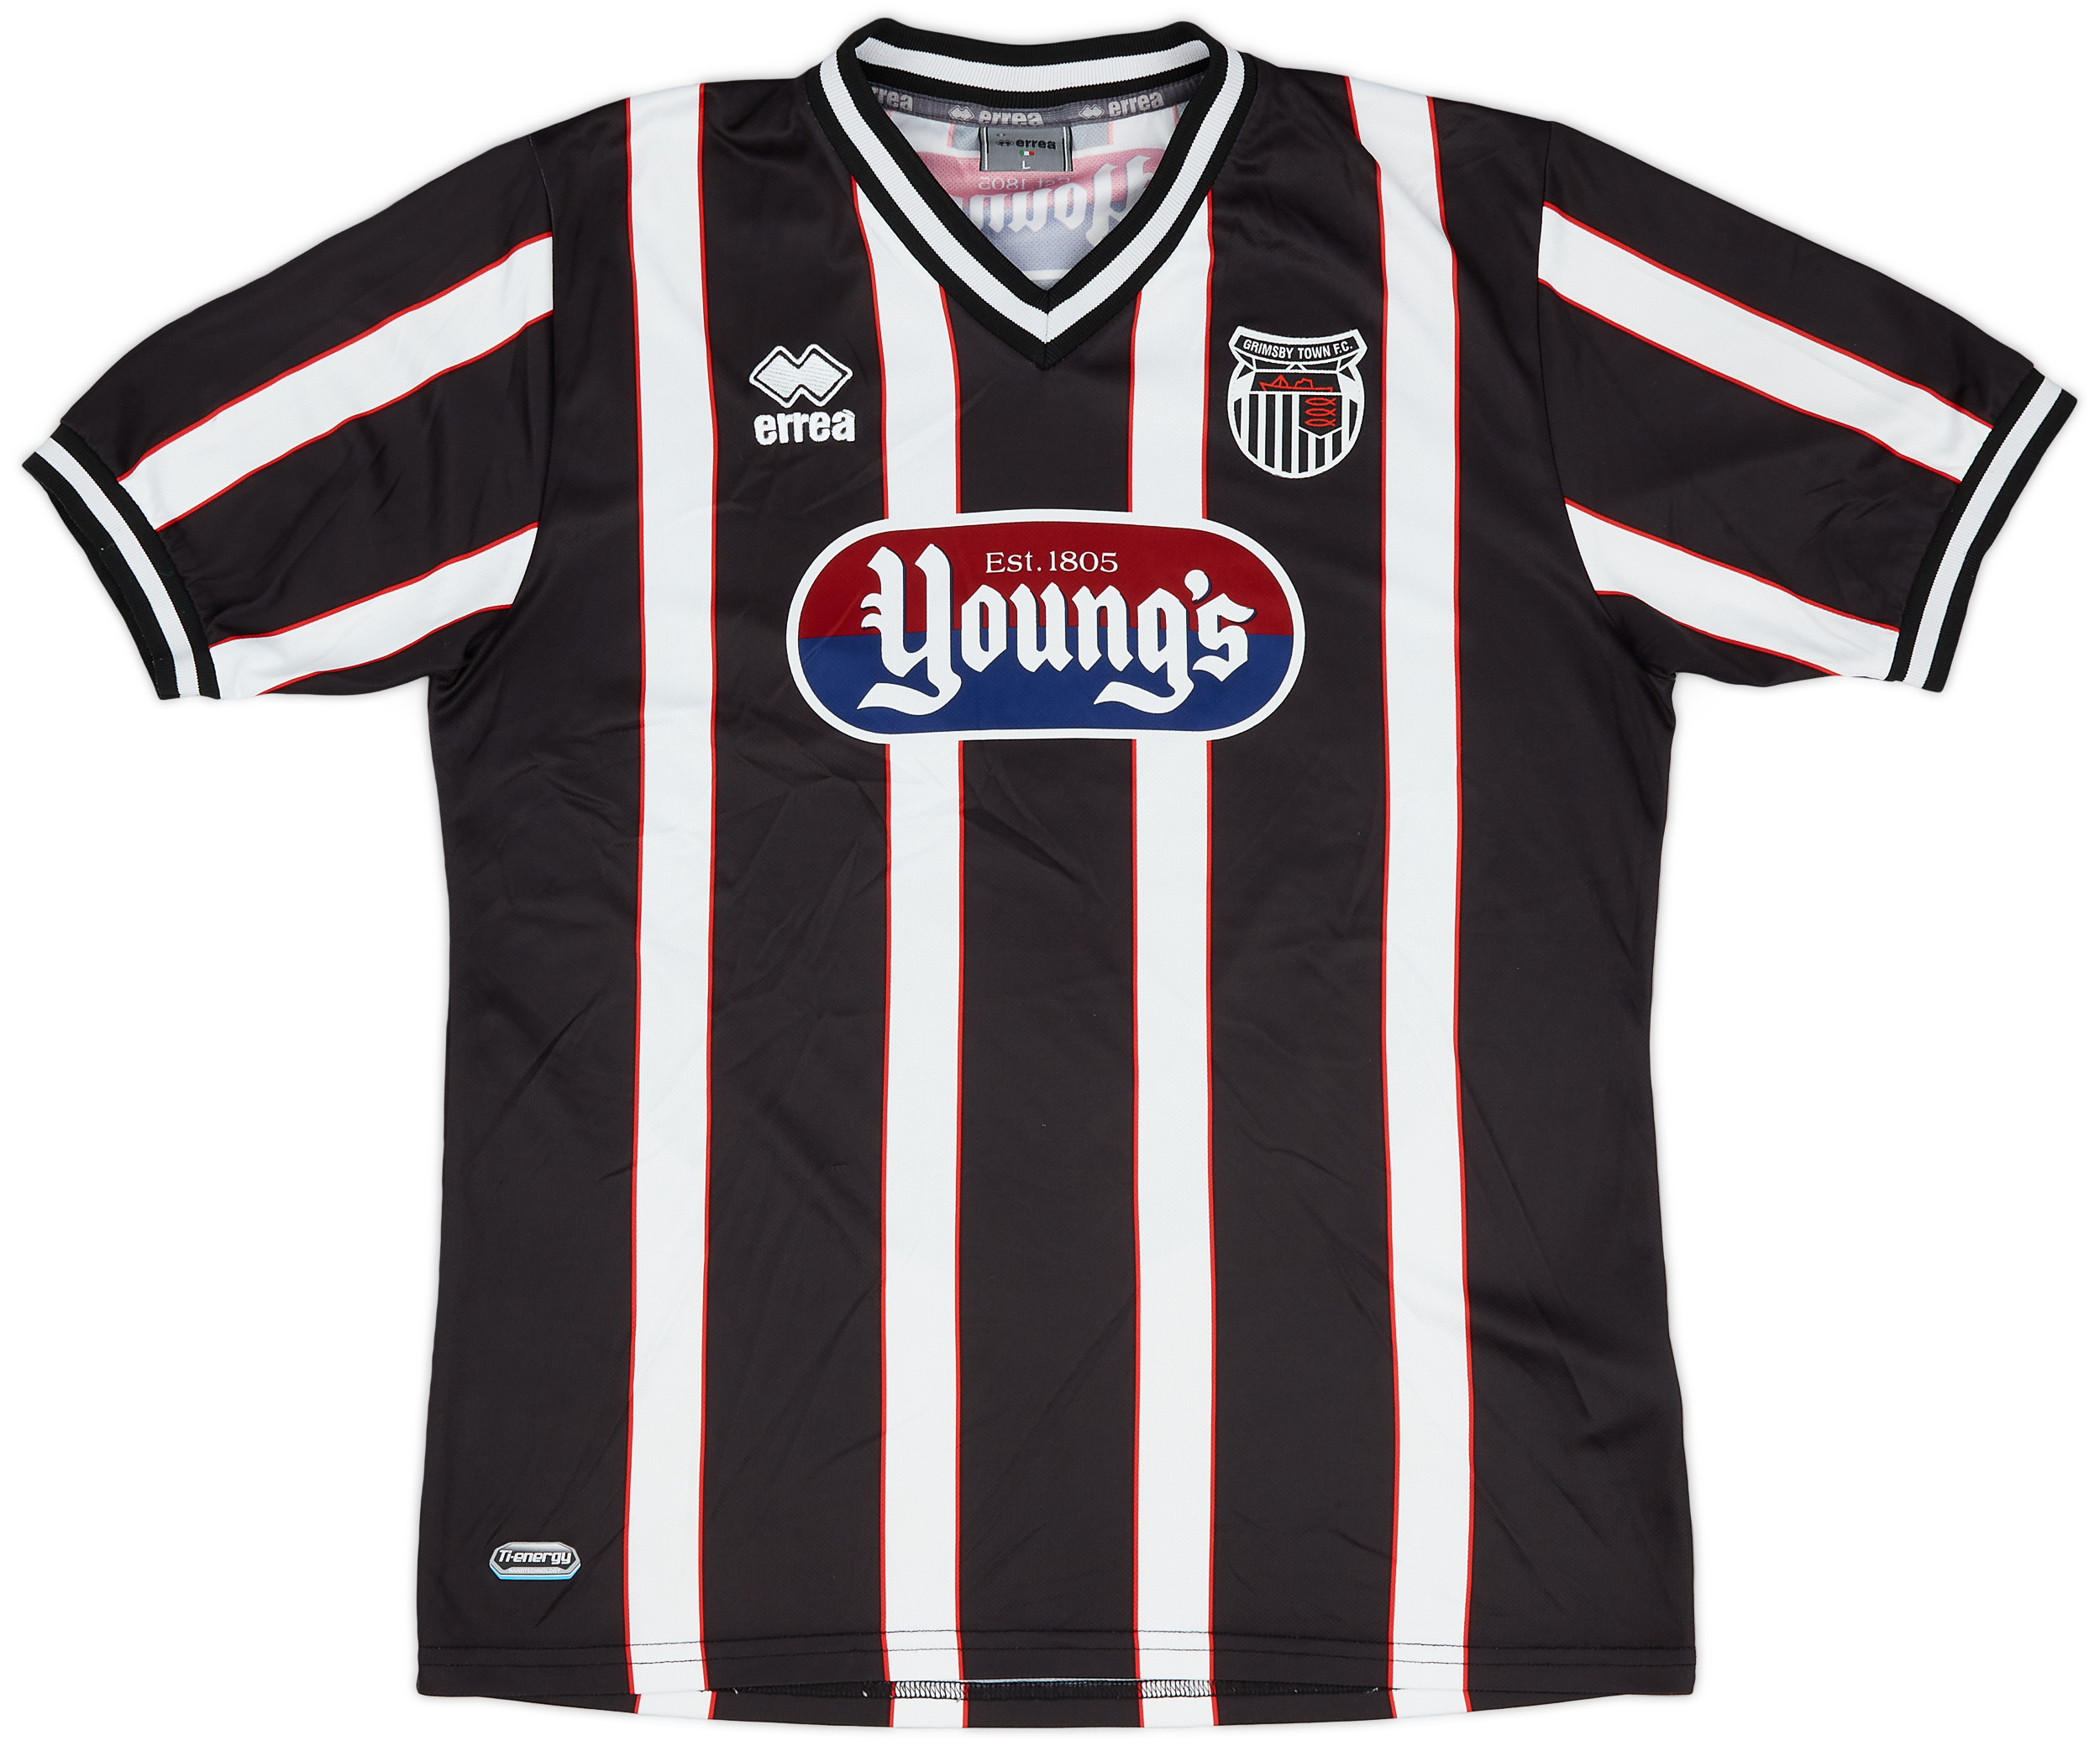 2011-12 Grimsby Town Home Shirt - 9/10 - ()